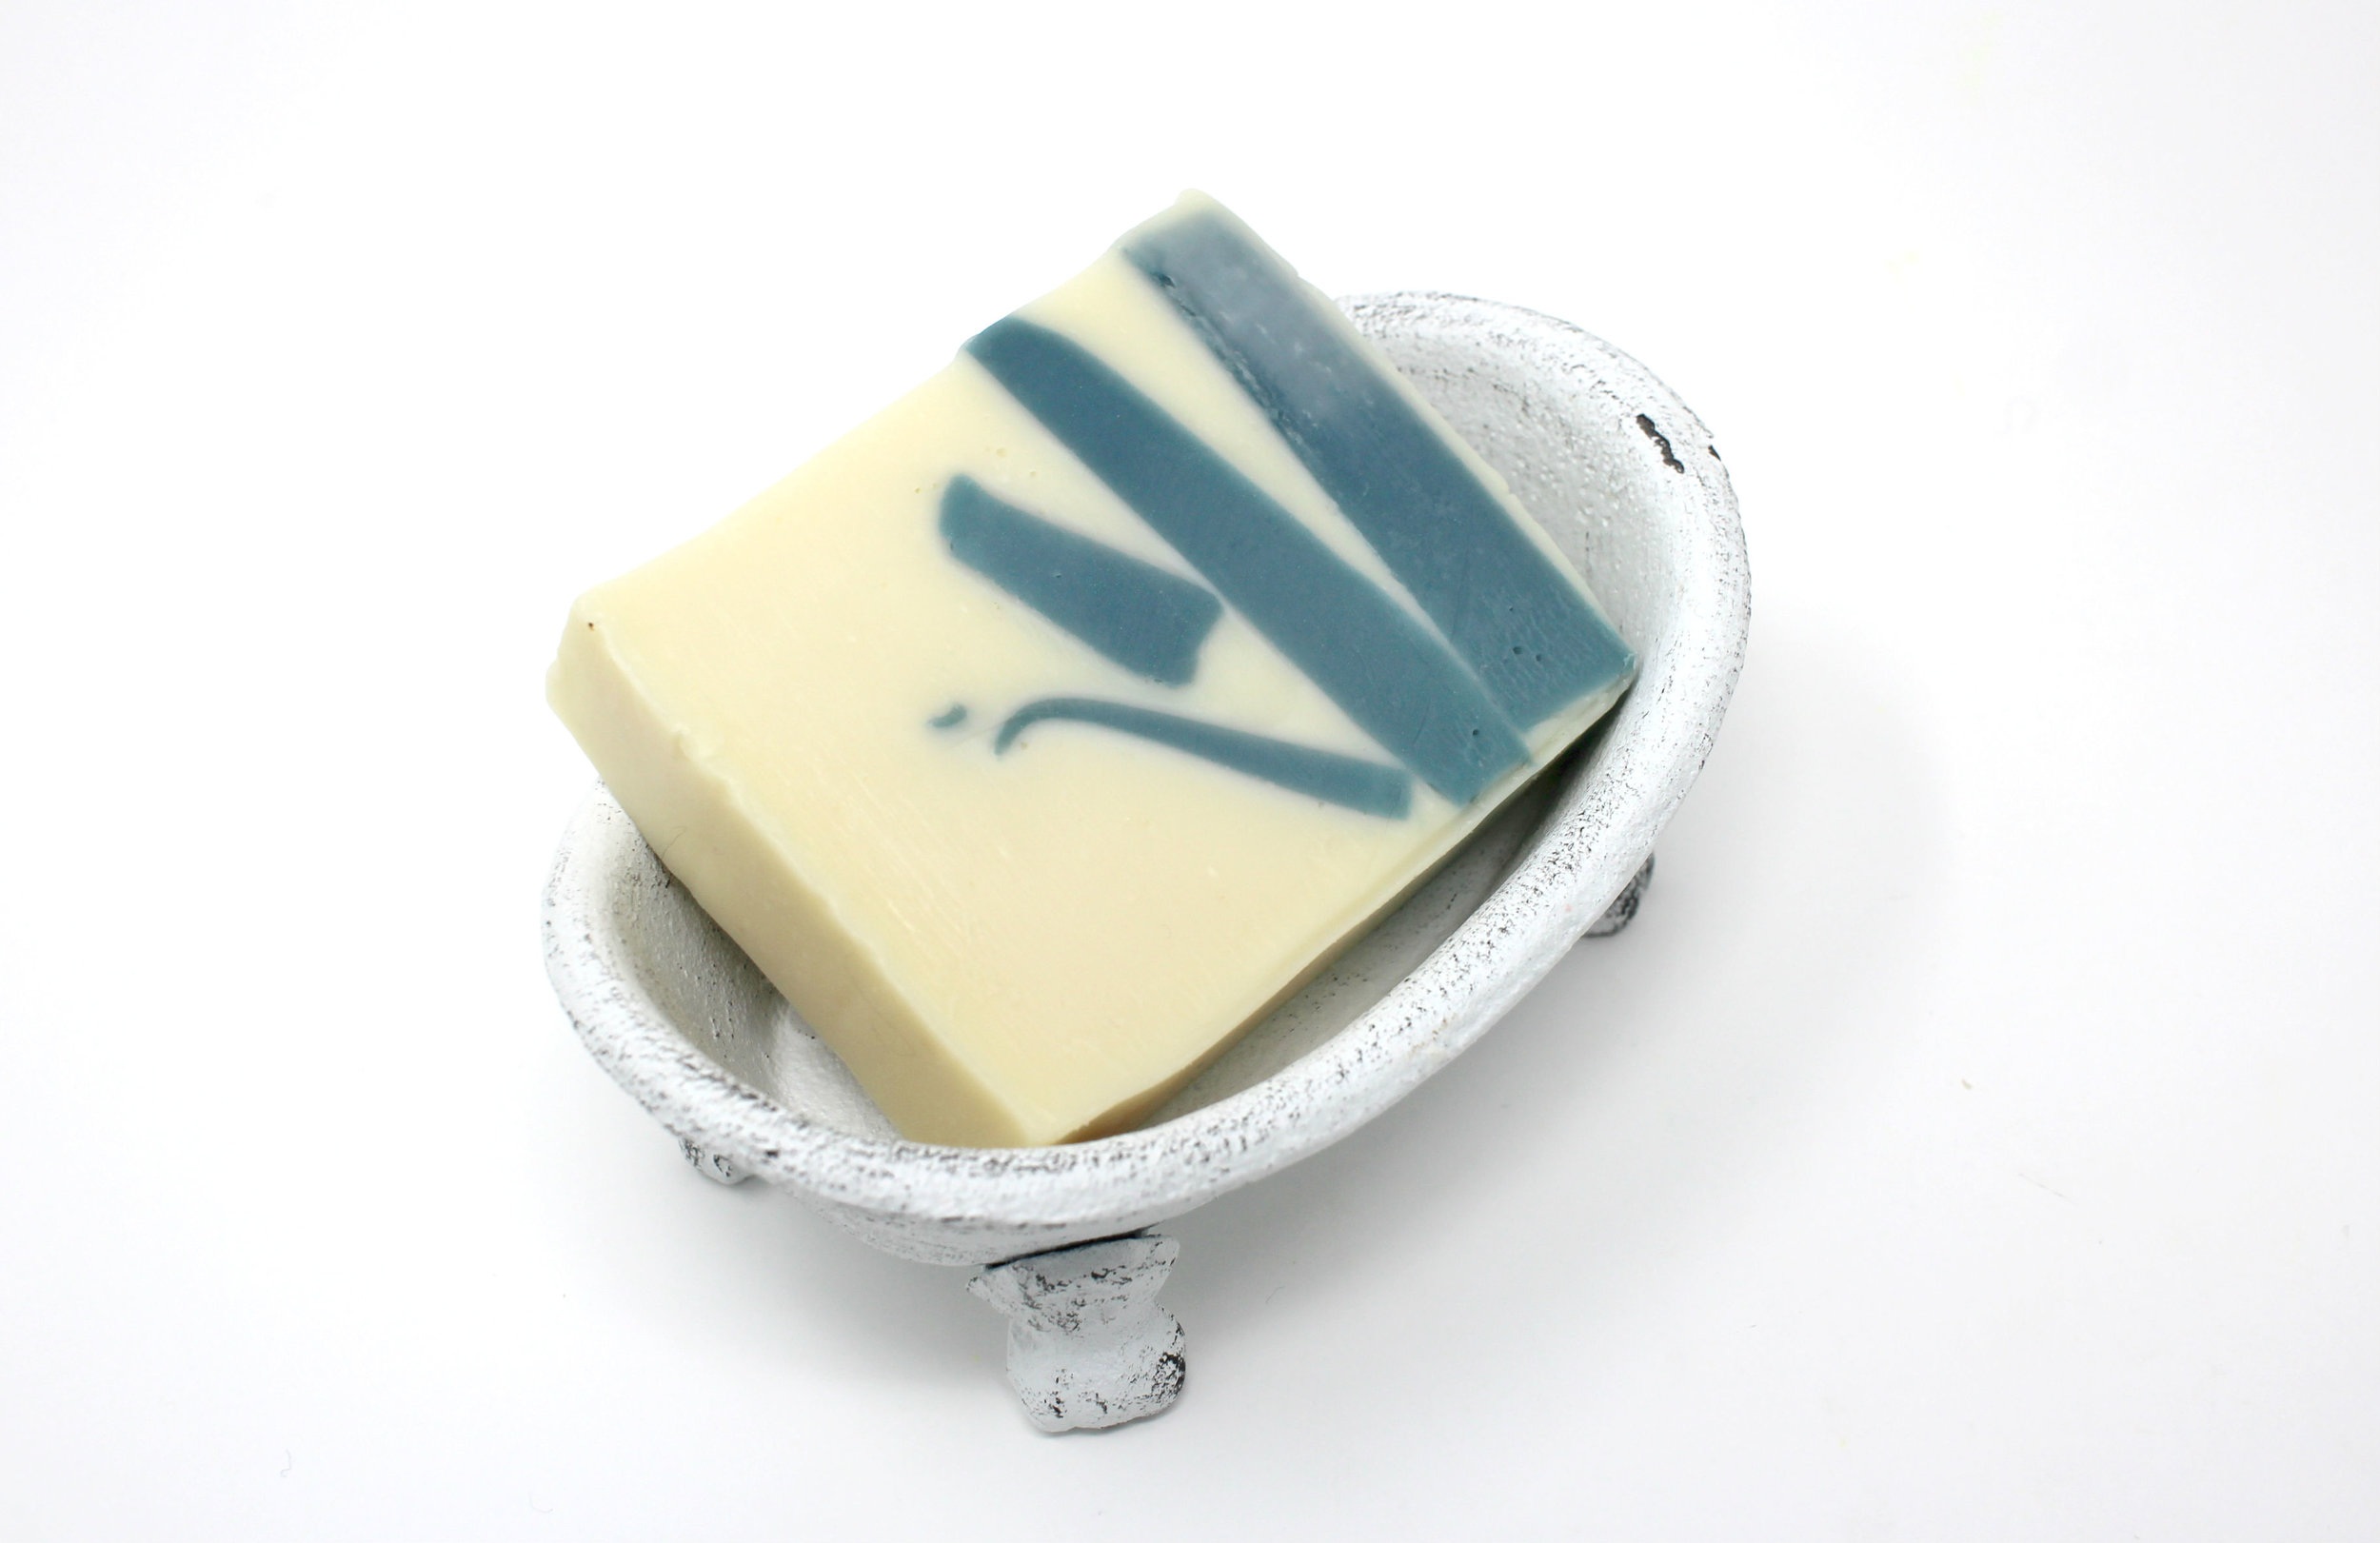 Single Bar of Cold Process Soap, over 30 scents to choose from — T&J  HANDCRAFTED SOAP